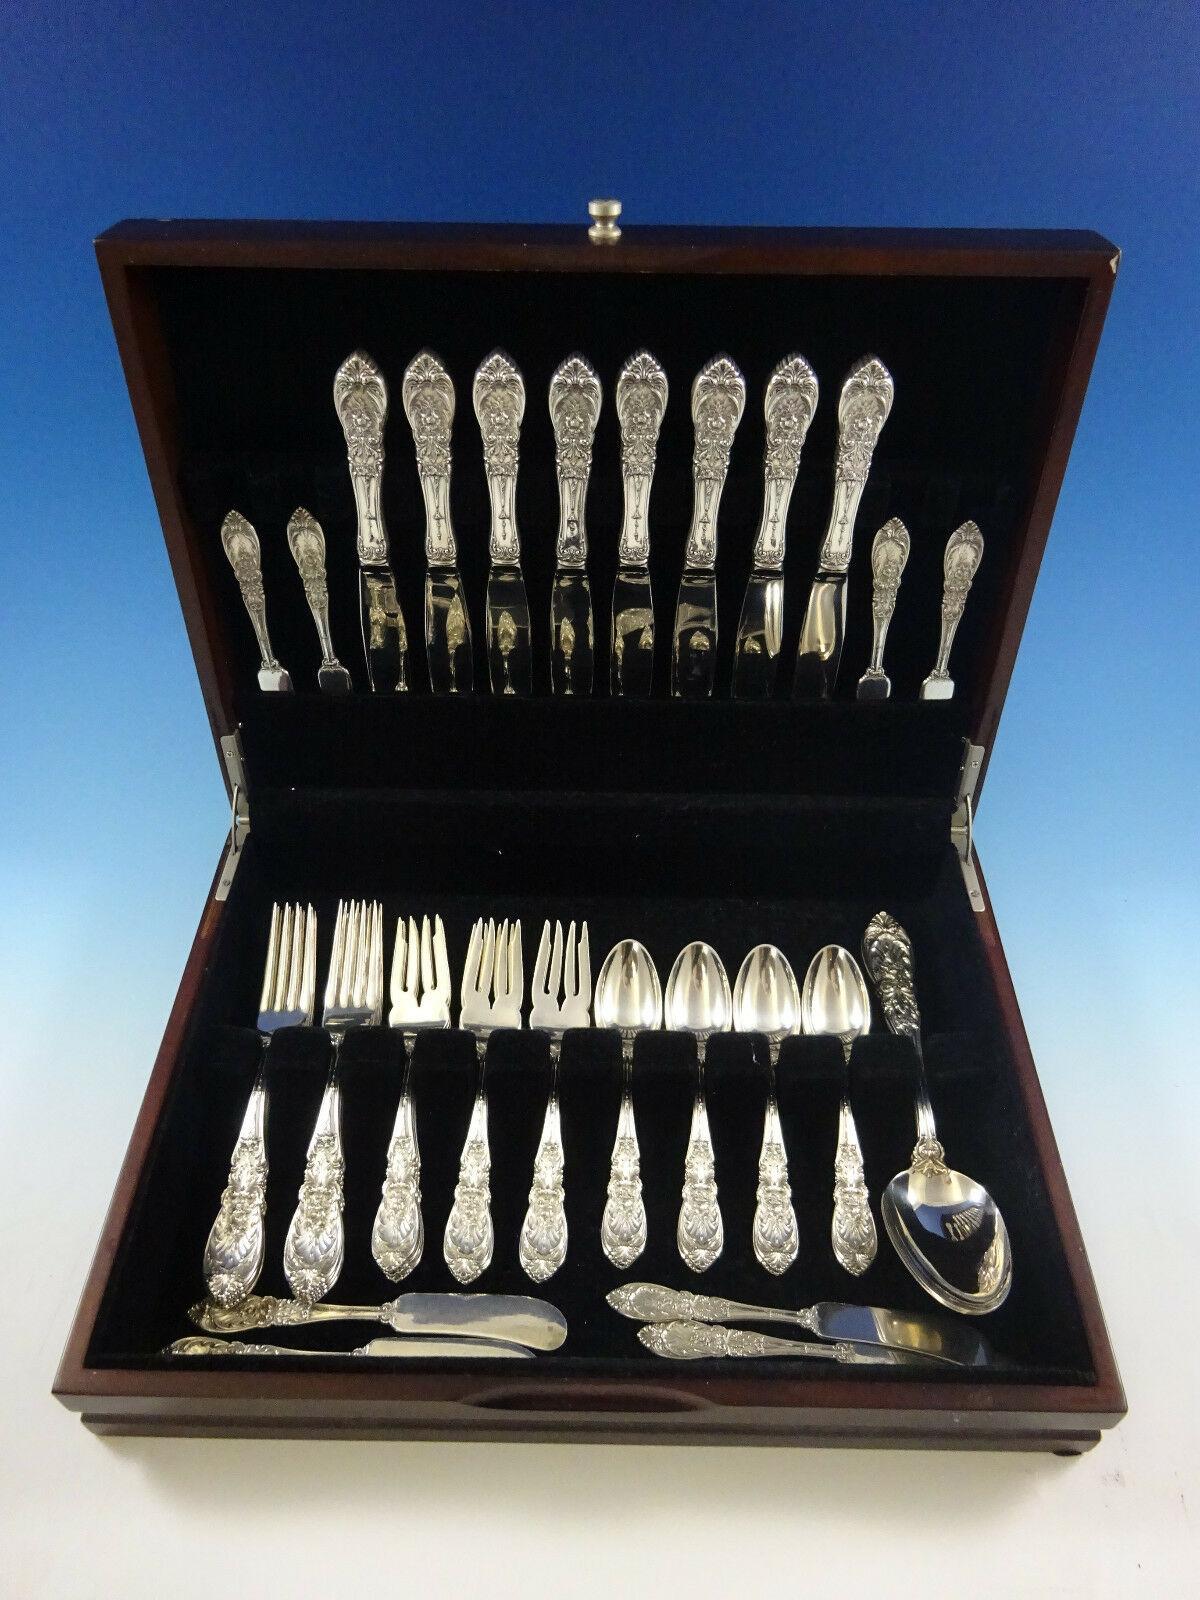 Richelieu by International sterling silver flatware set - 42 pieces. This set includes:

8 knives, 8 3/4